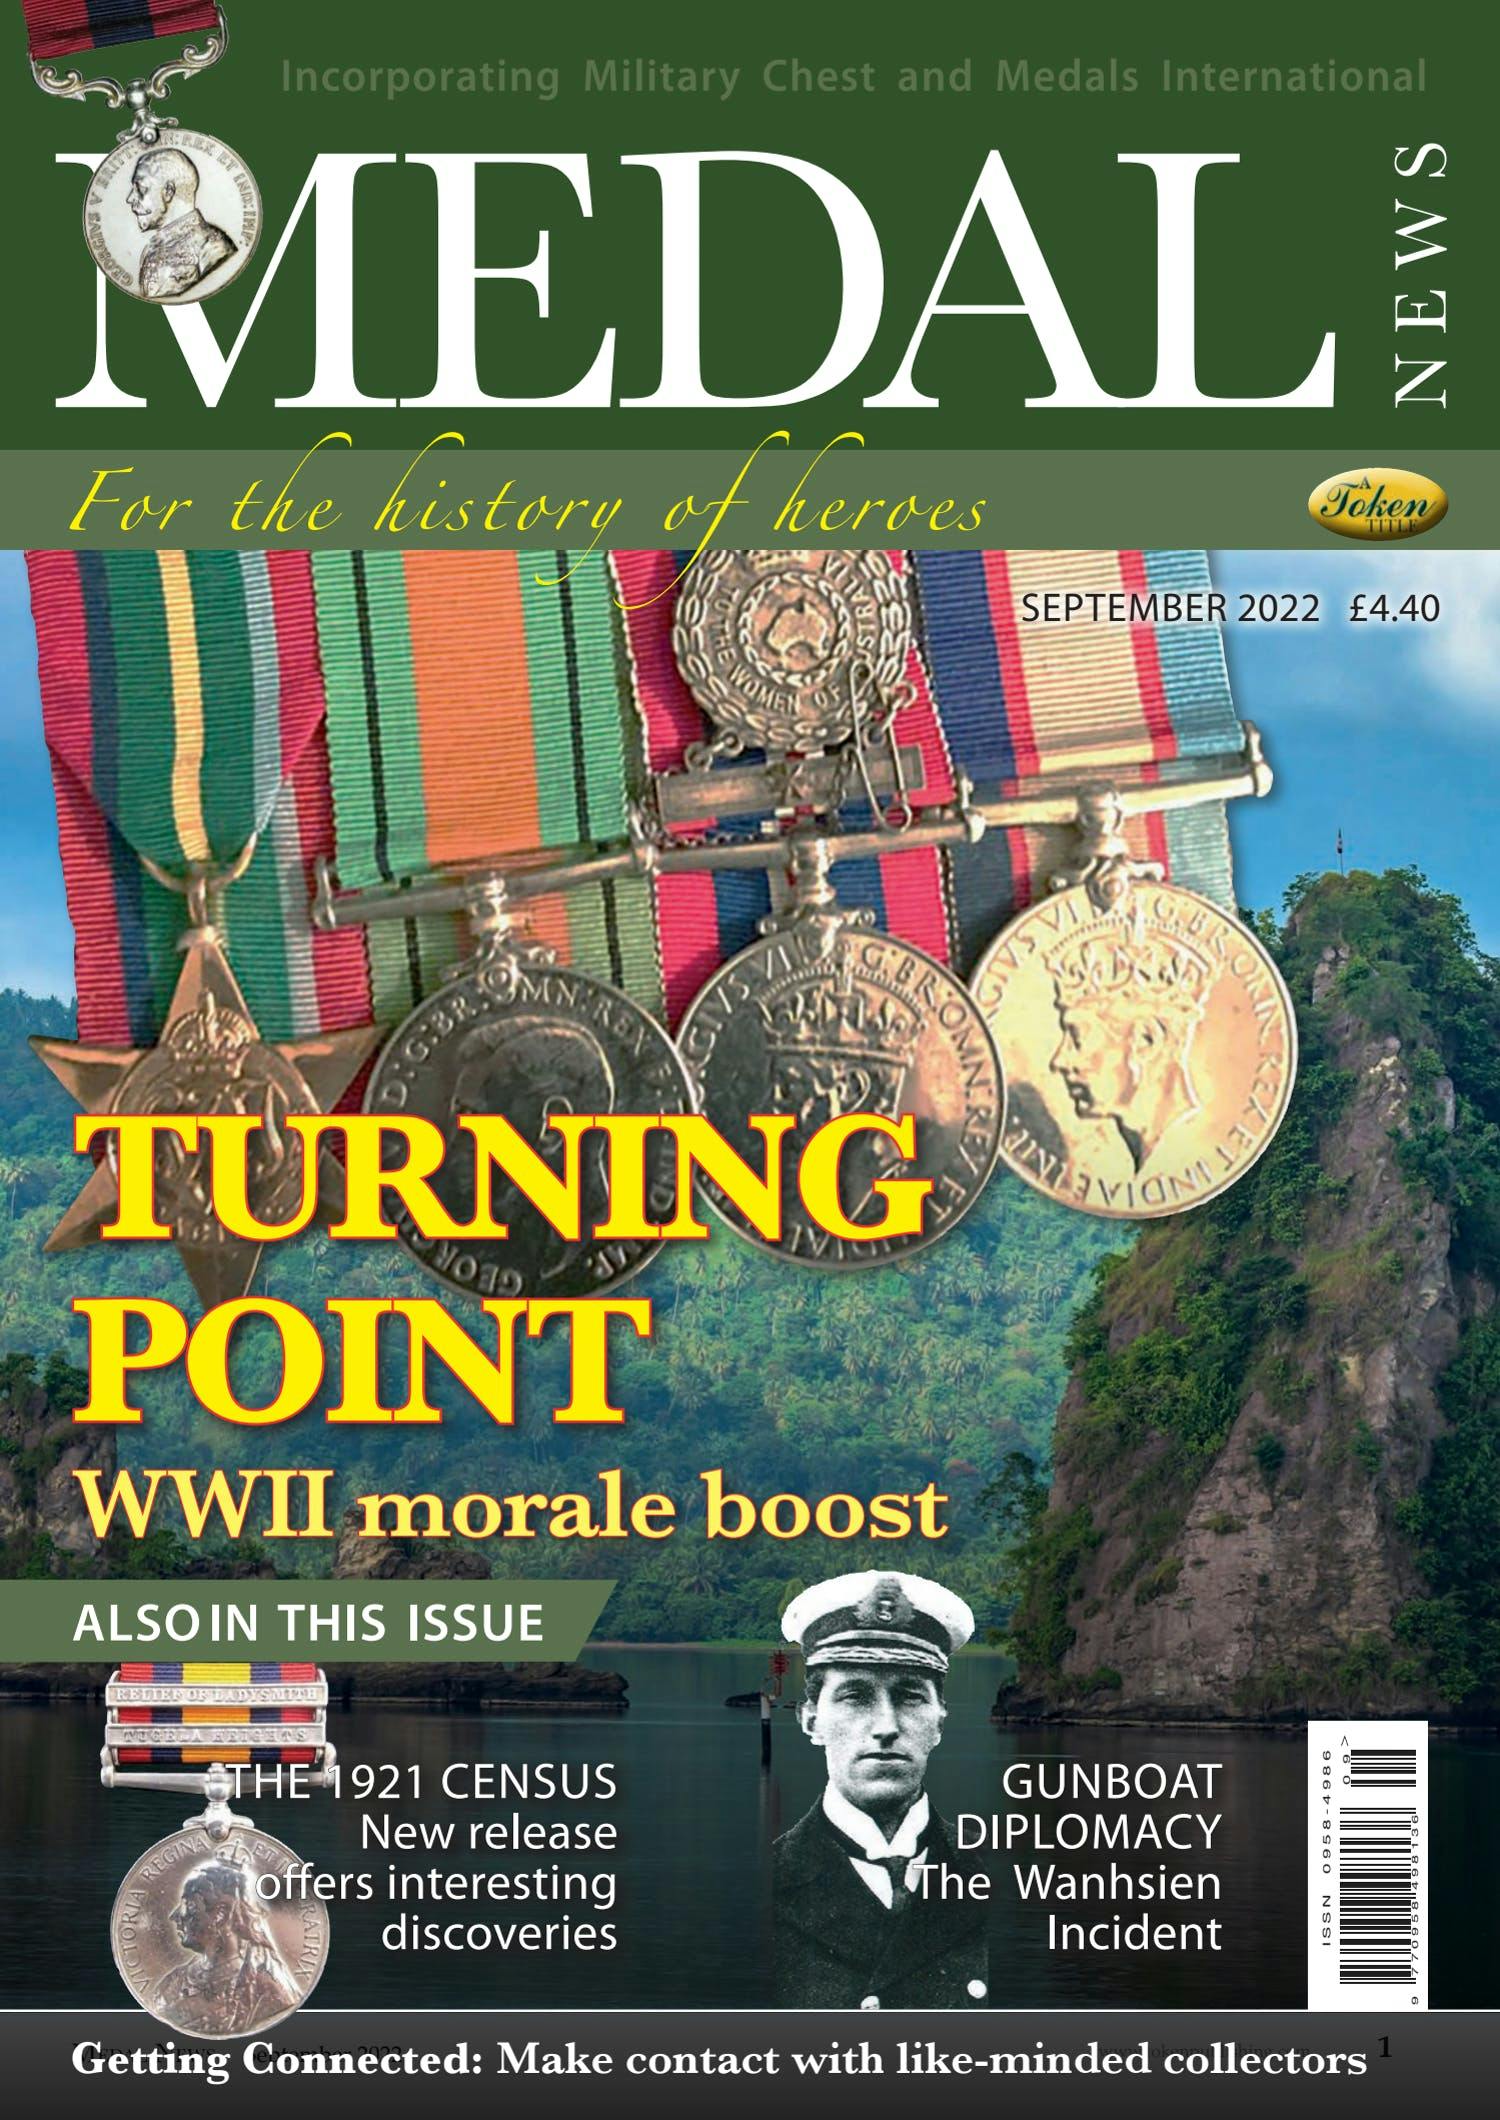 The front cover of Medal News, Volume 60, Number 8, September 2022